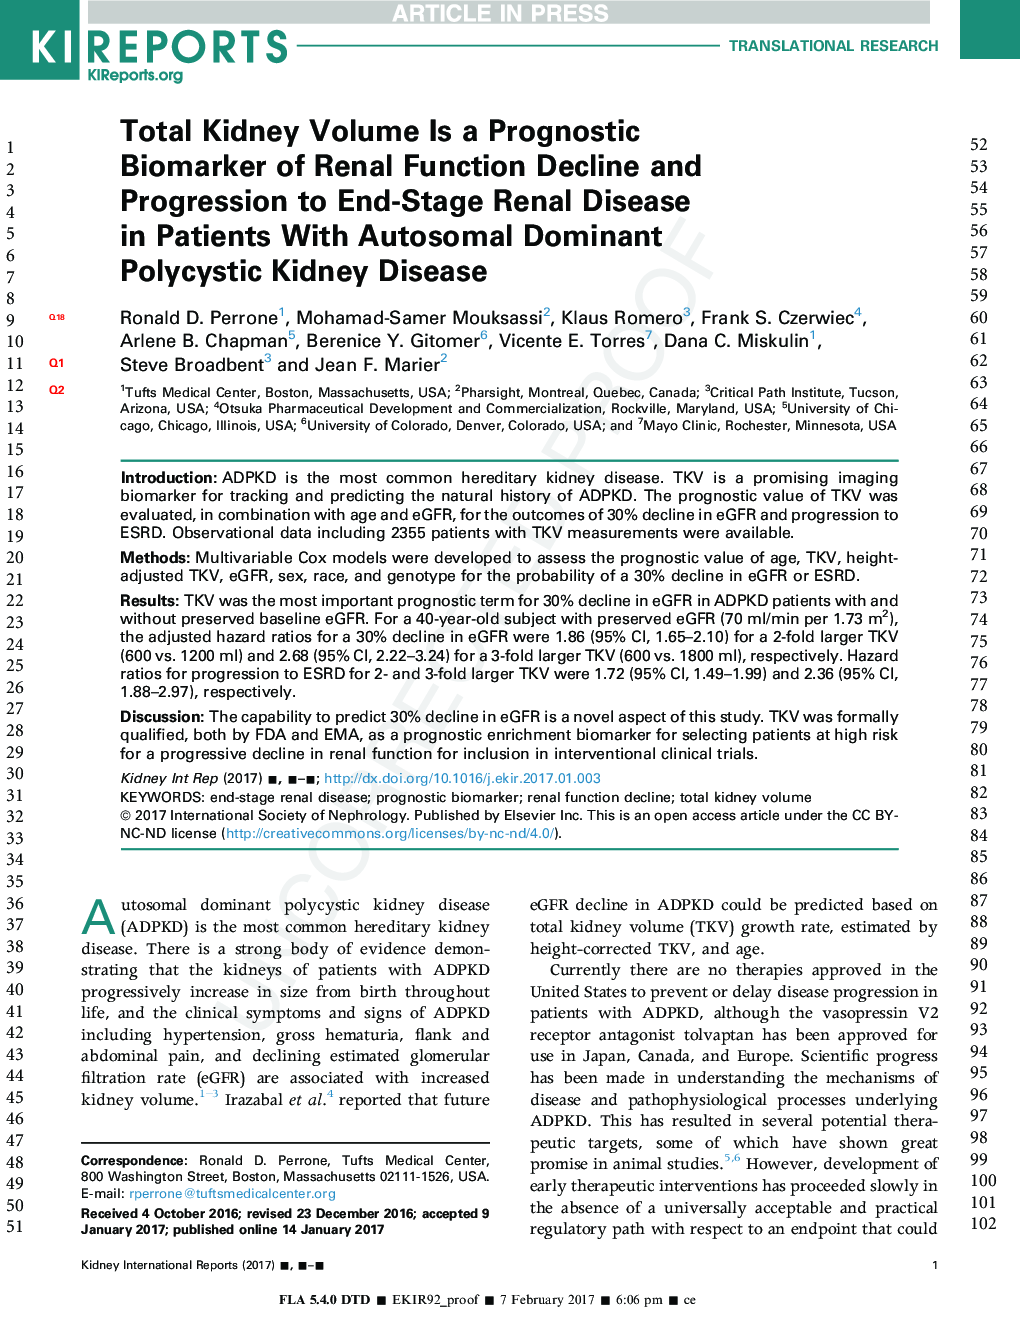 Total Kidney Volume Is a Prognostic Biomarker of Renal Function Decline and Progression to End-Stage Renal Disease inÂ Patients With Autosomal Dominant Polycystic Kidney Disease